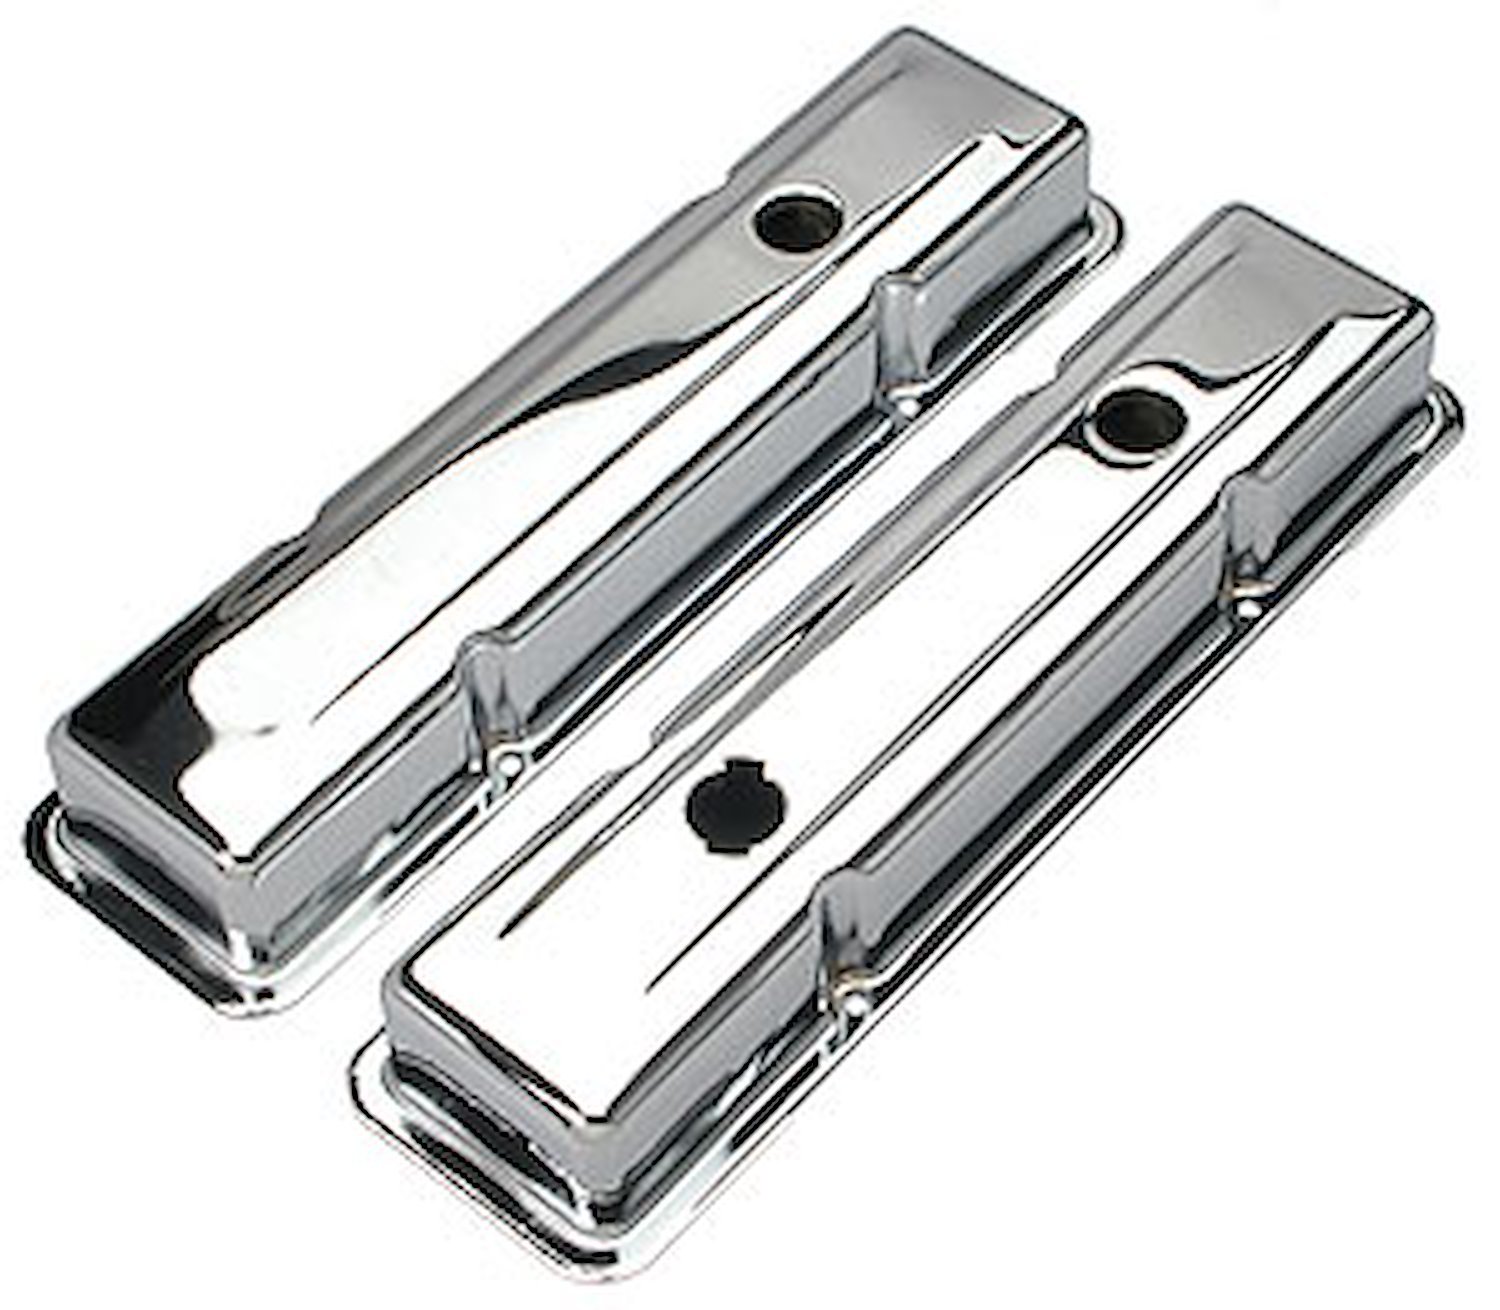 OEM Reproduction Chrome Plated Steel Valve Covers 1958-1986 Small Block Chevy 283-400 V8